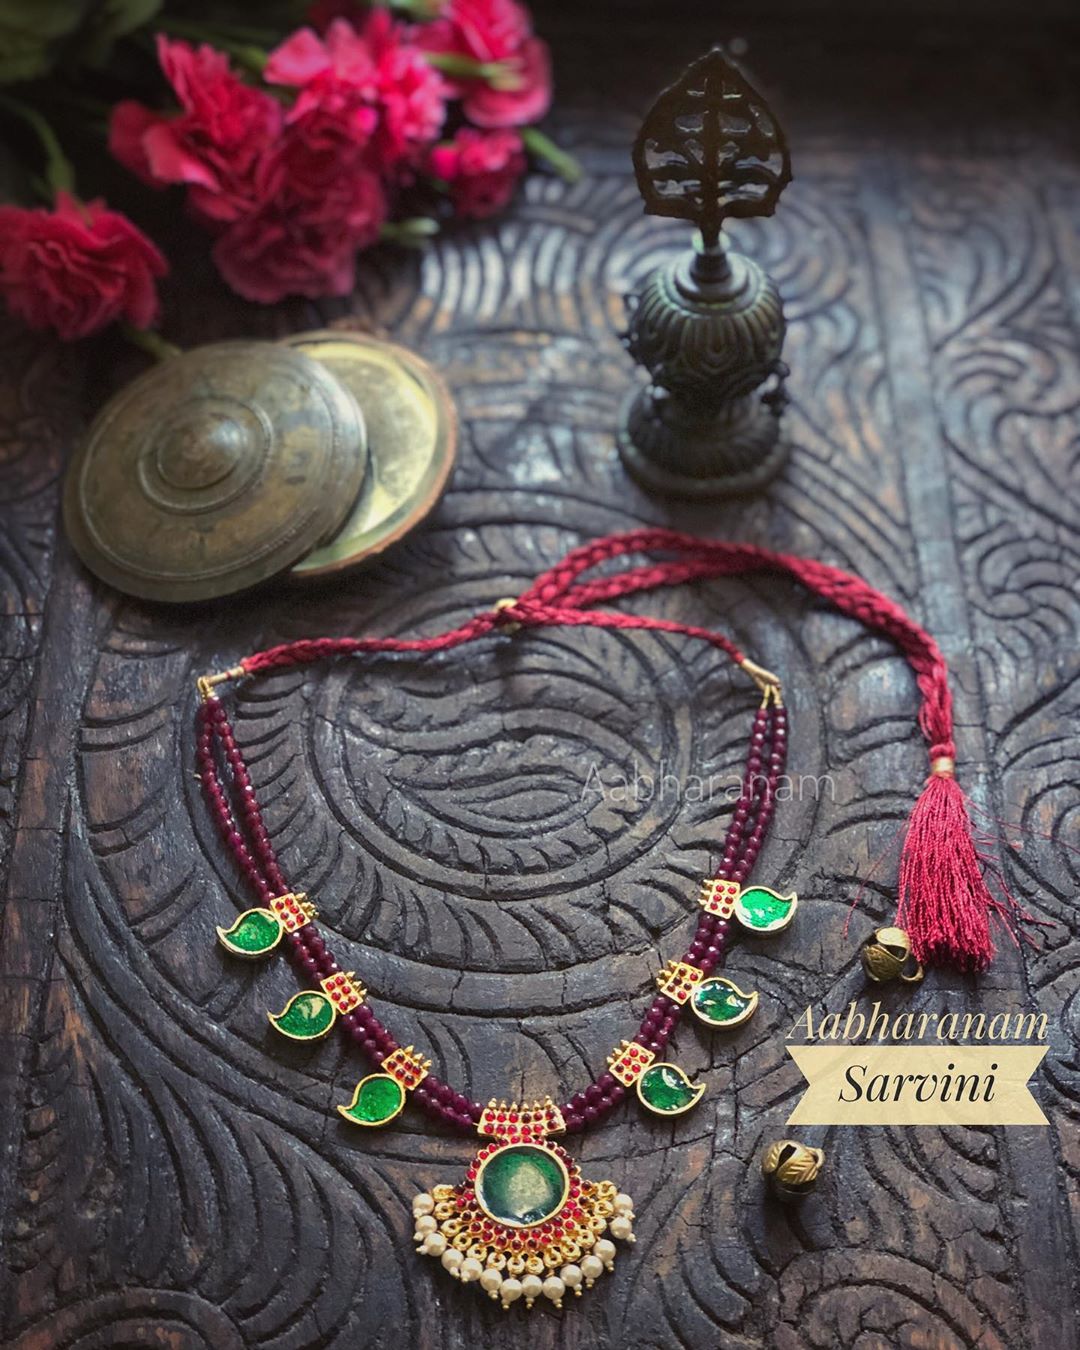 Attractive Necklace From Abharanam